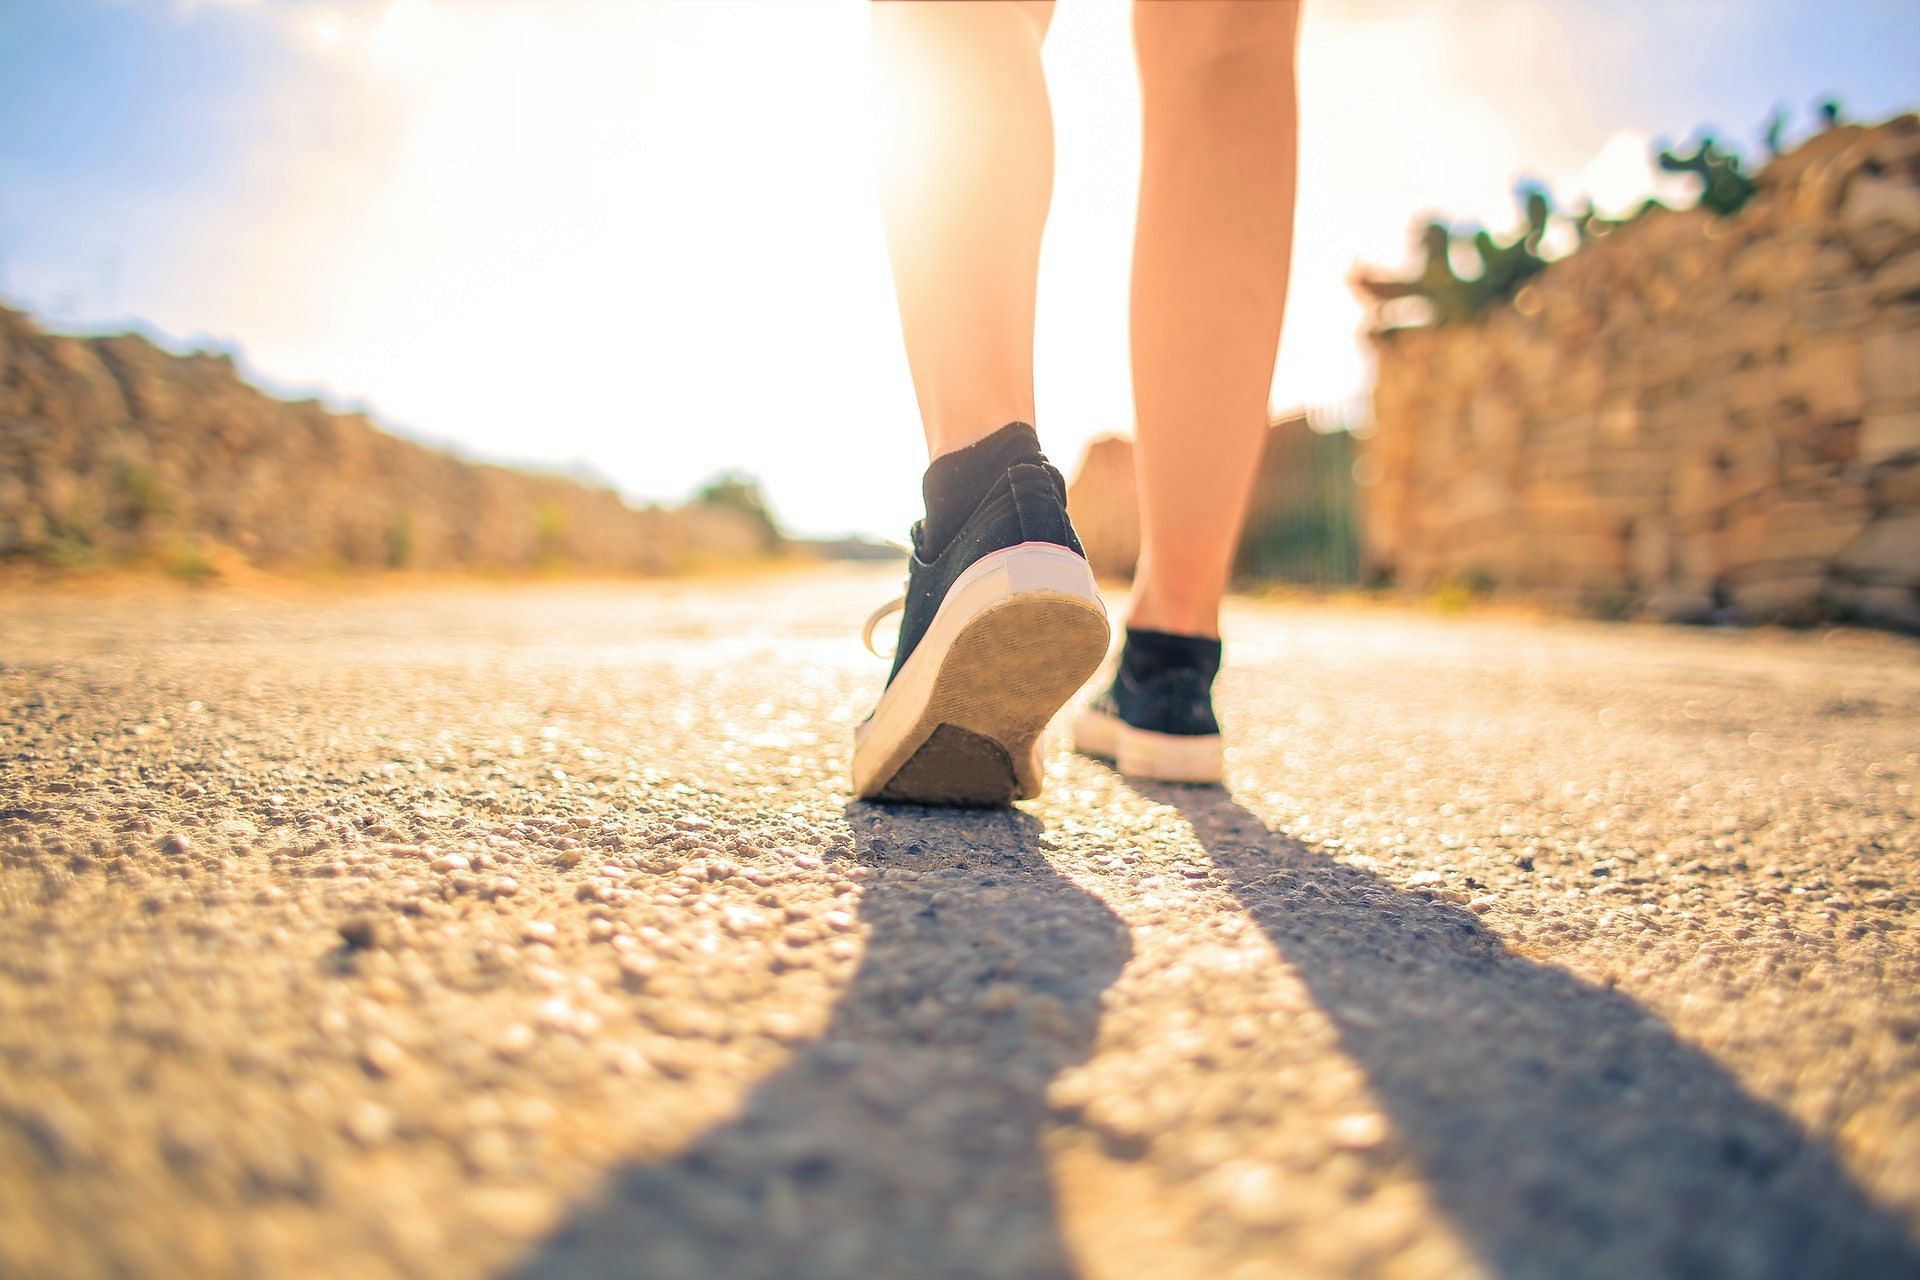 There are various ways to add balance exercises in your walking routine. (Photo by Andrea Piacquadio via pexels)